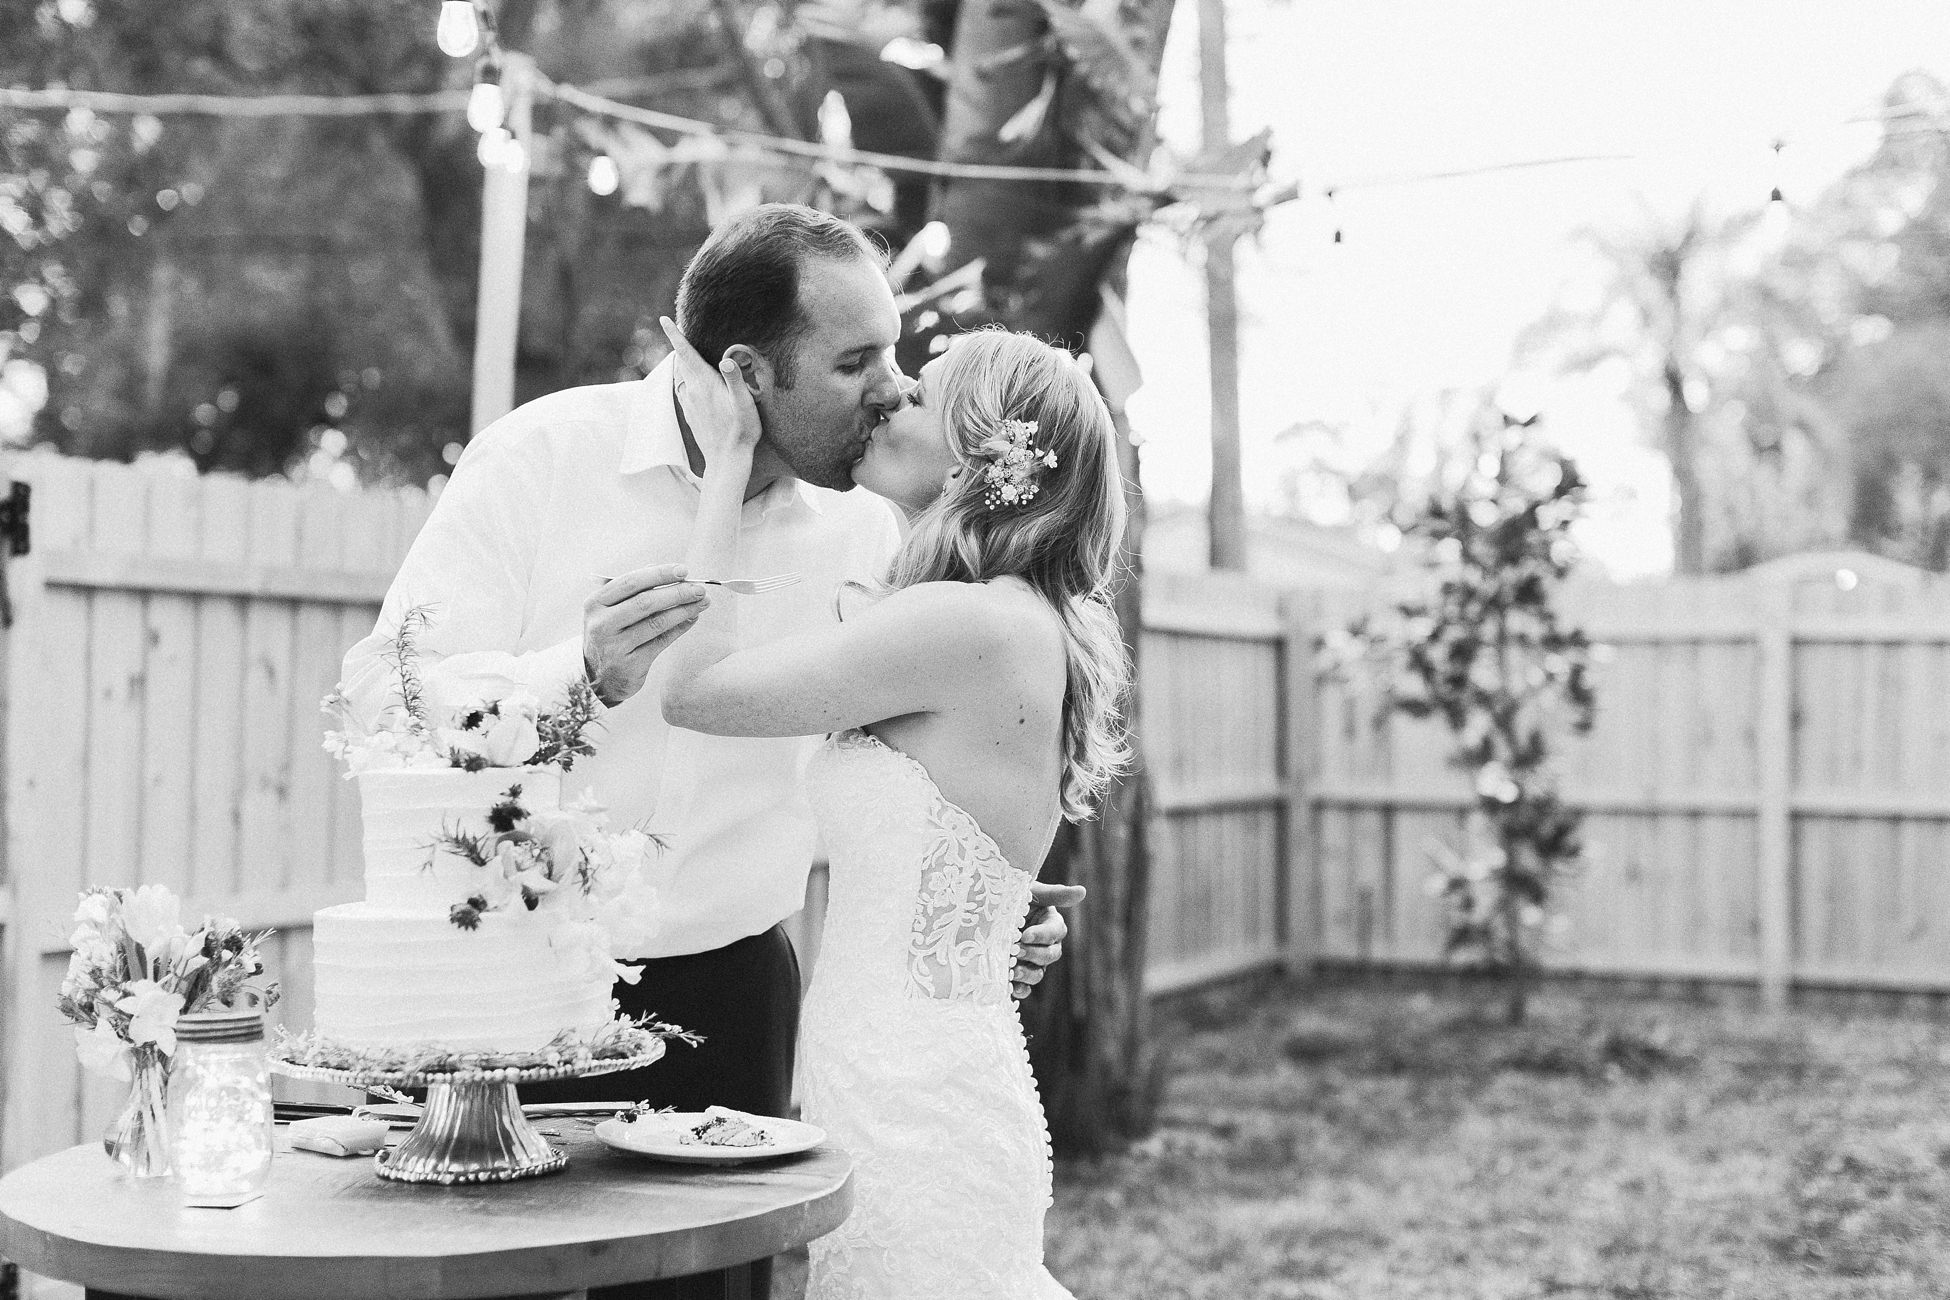 Tampa Wedding Photographer | © Ailyn La Torre Photography 2018